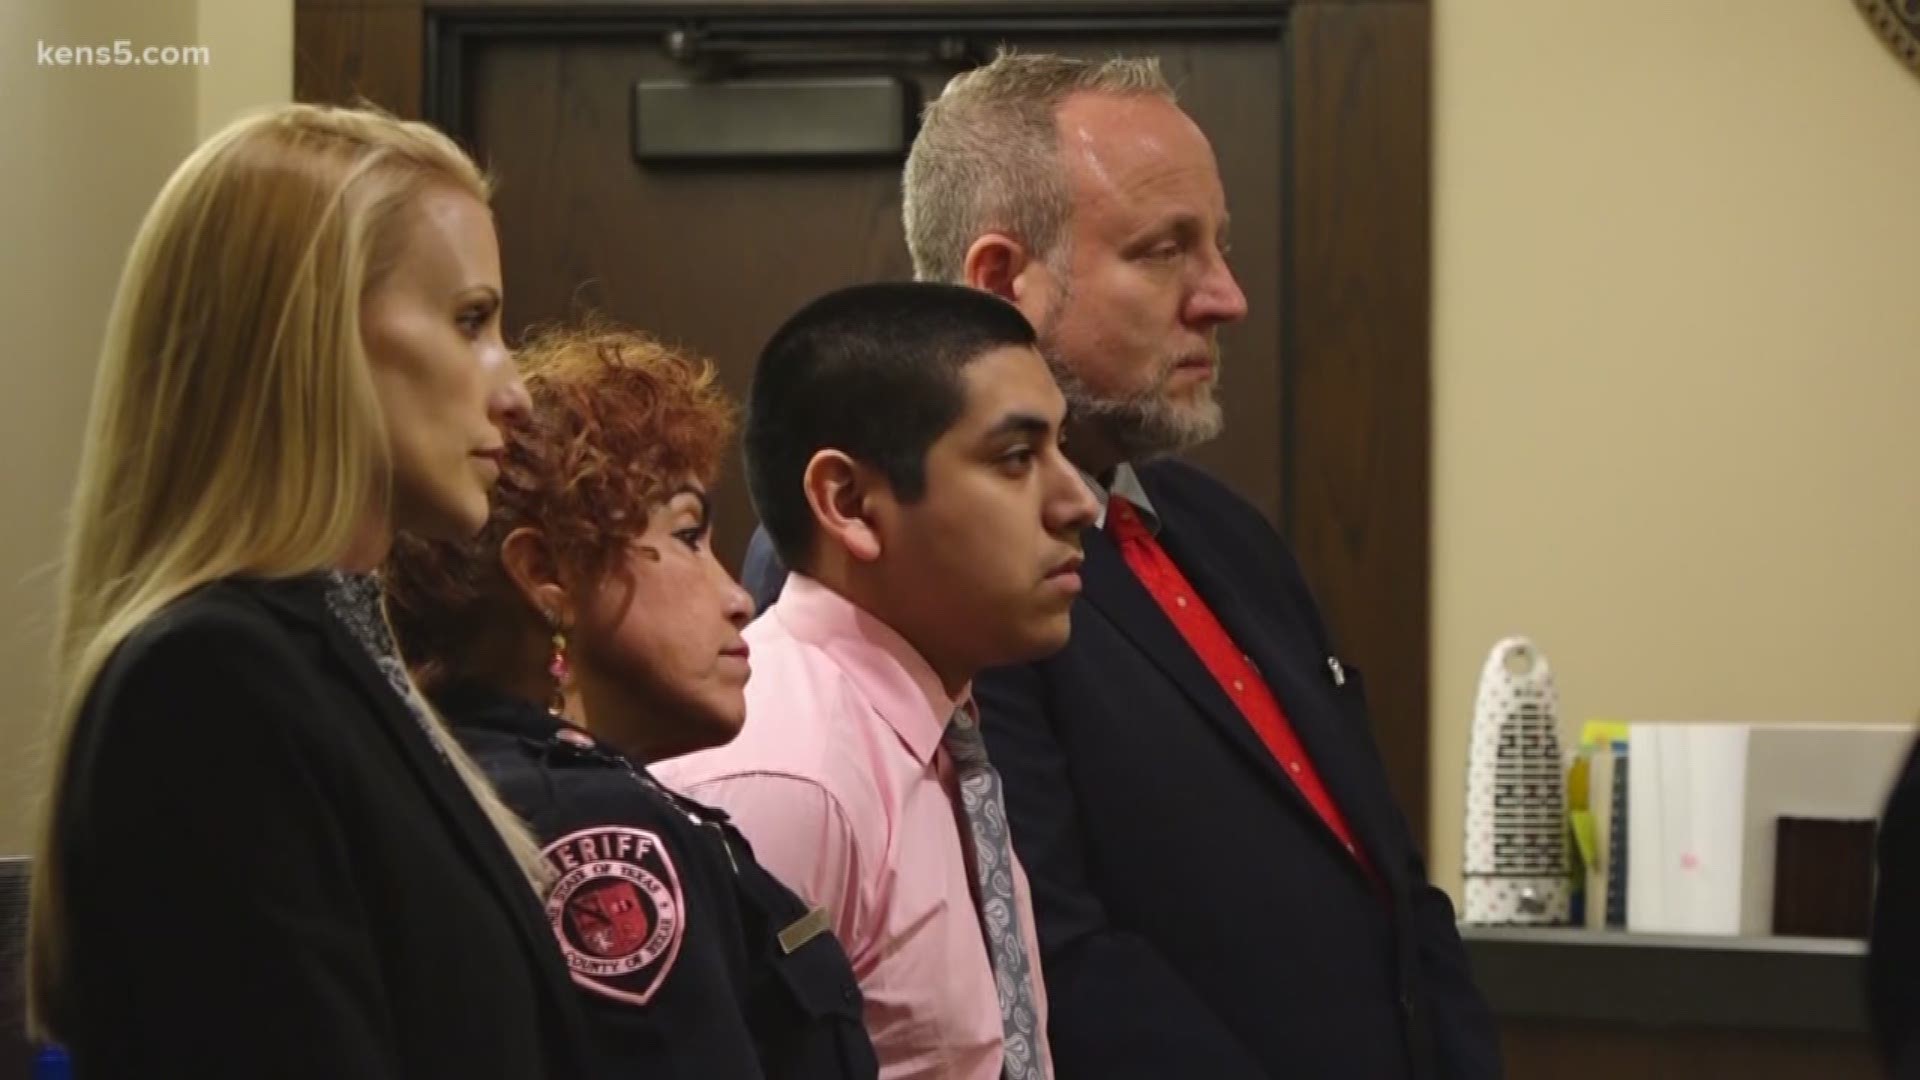 A jury found Jonathan Perales guilty of capital murder in the deadly shooting of Michael Robinson.